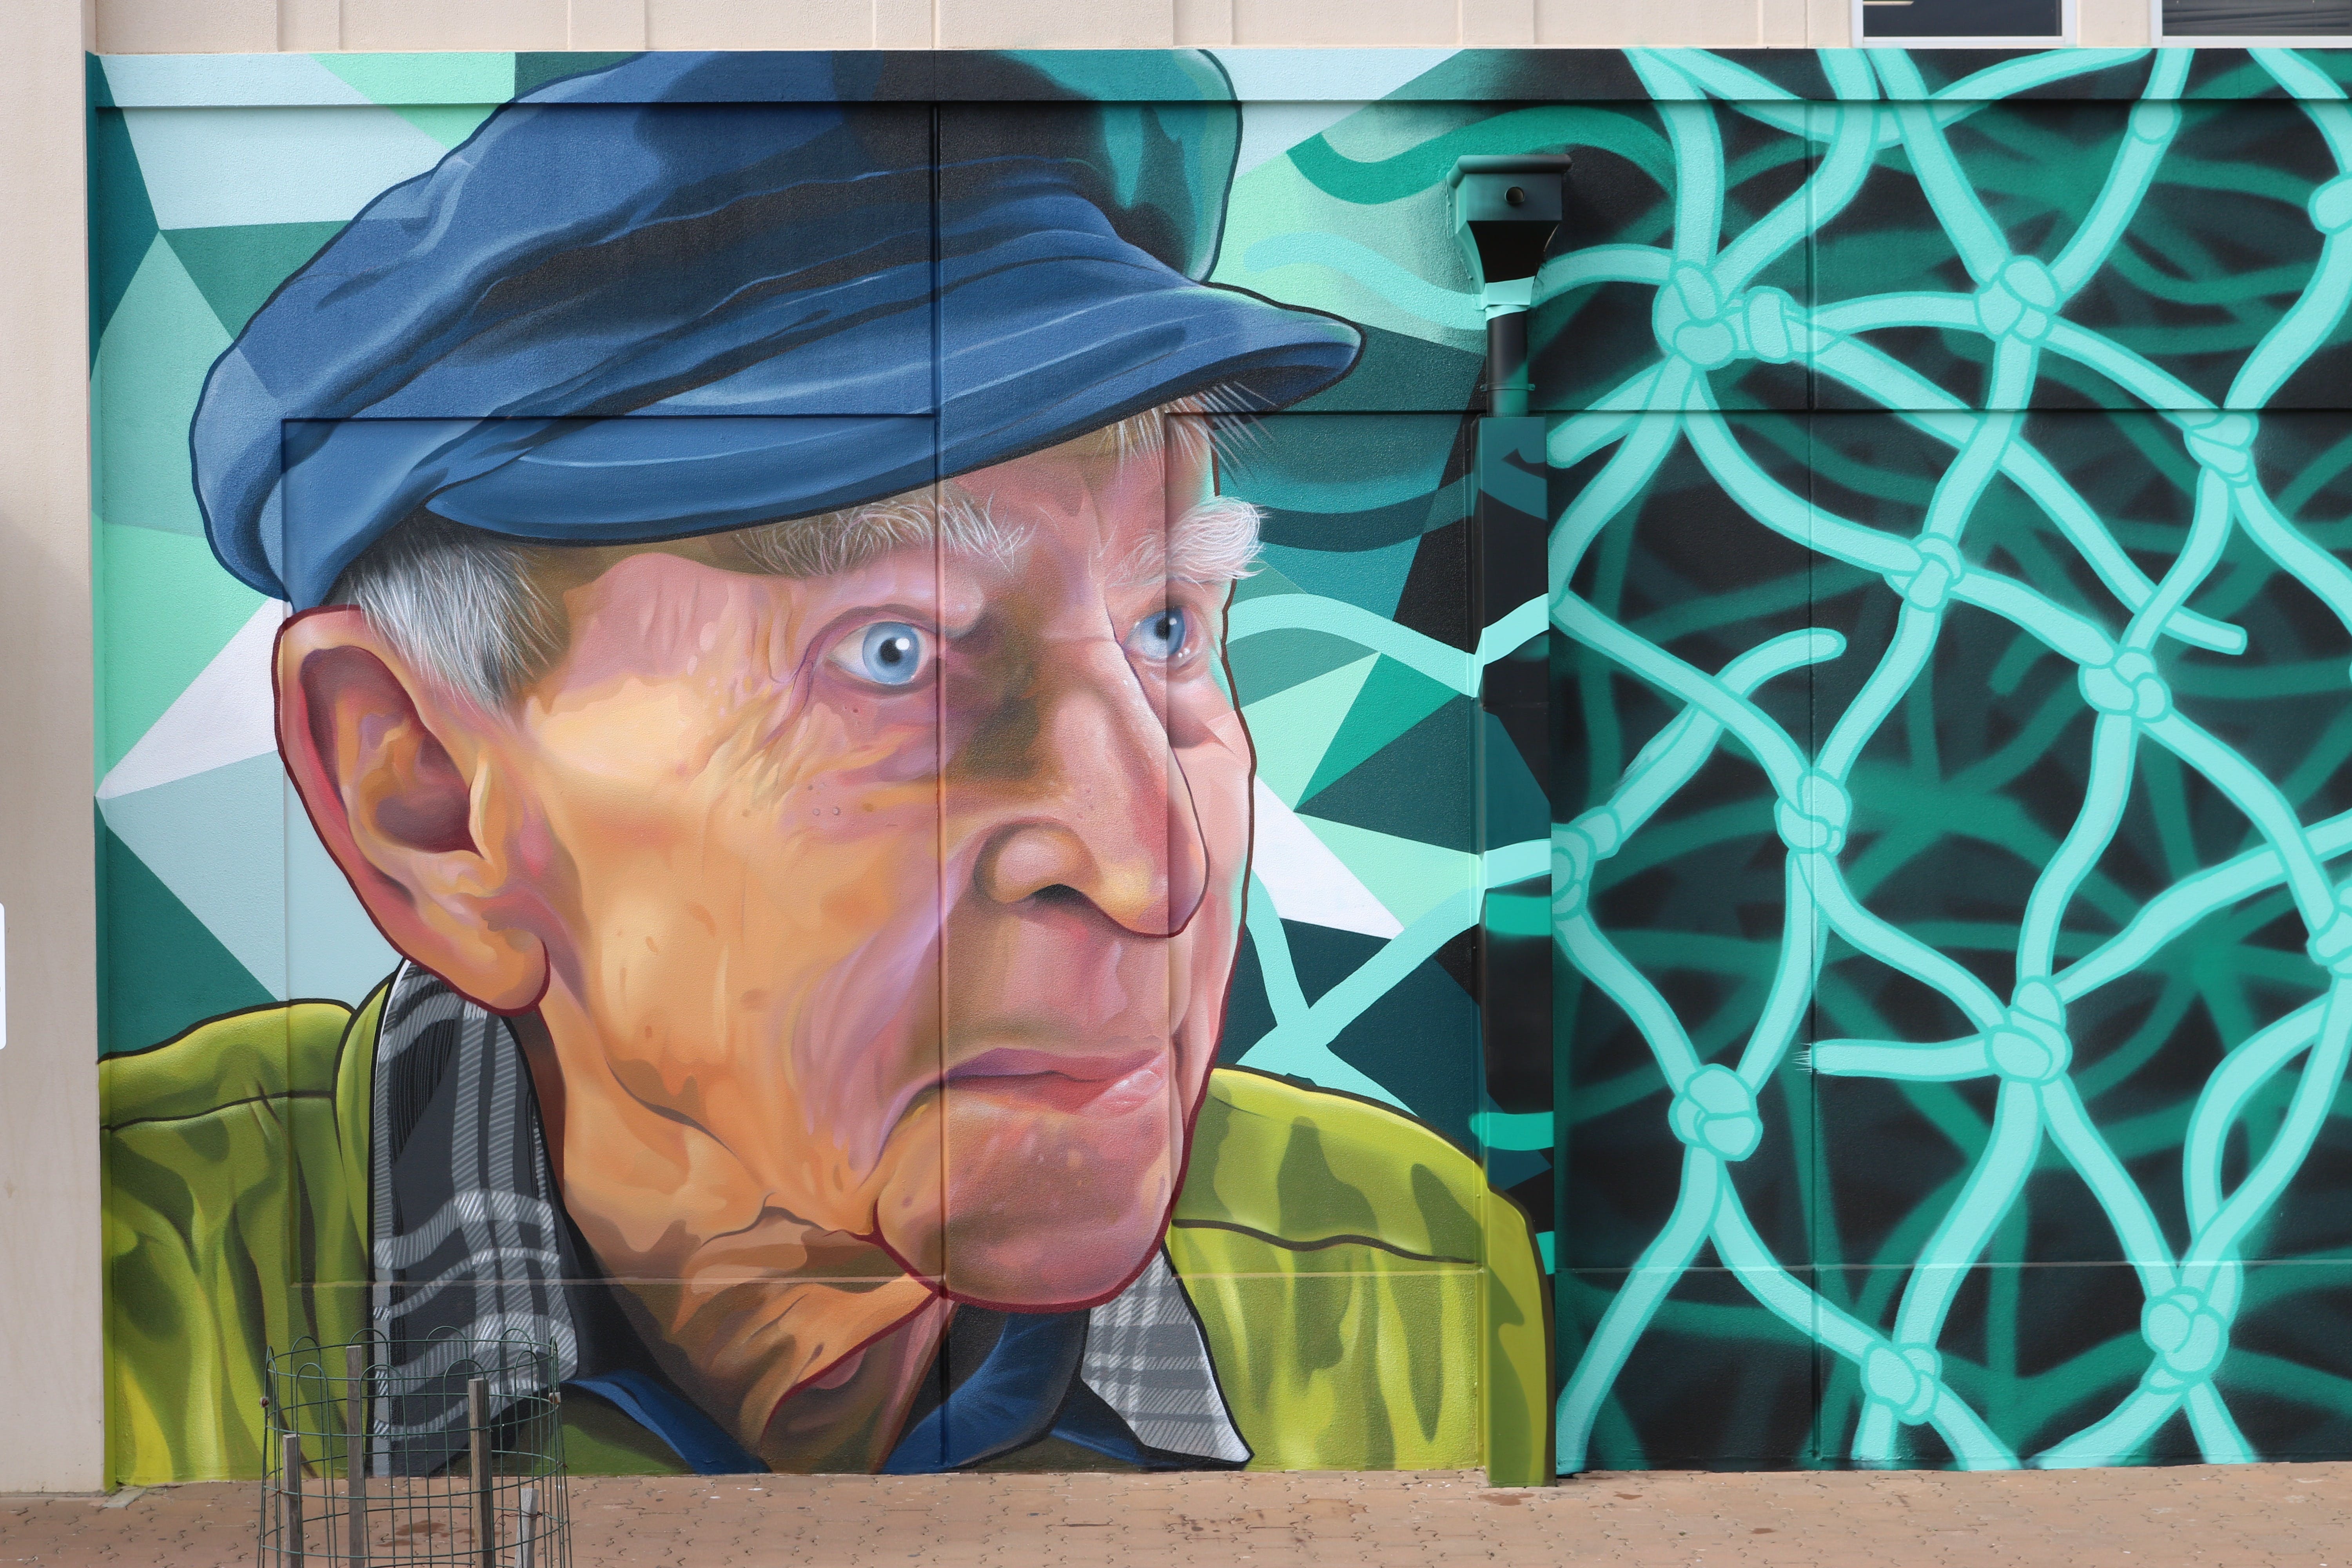 Port Pirie Mural Trail - Attractions